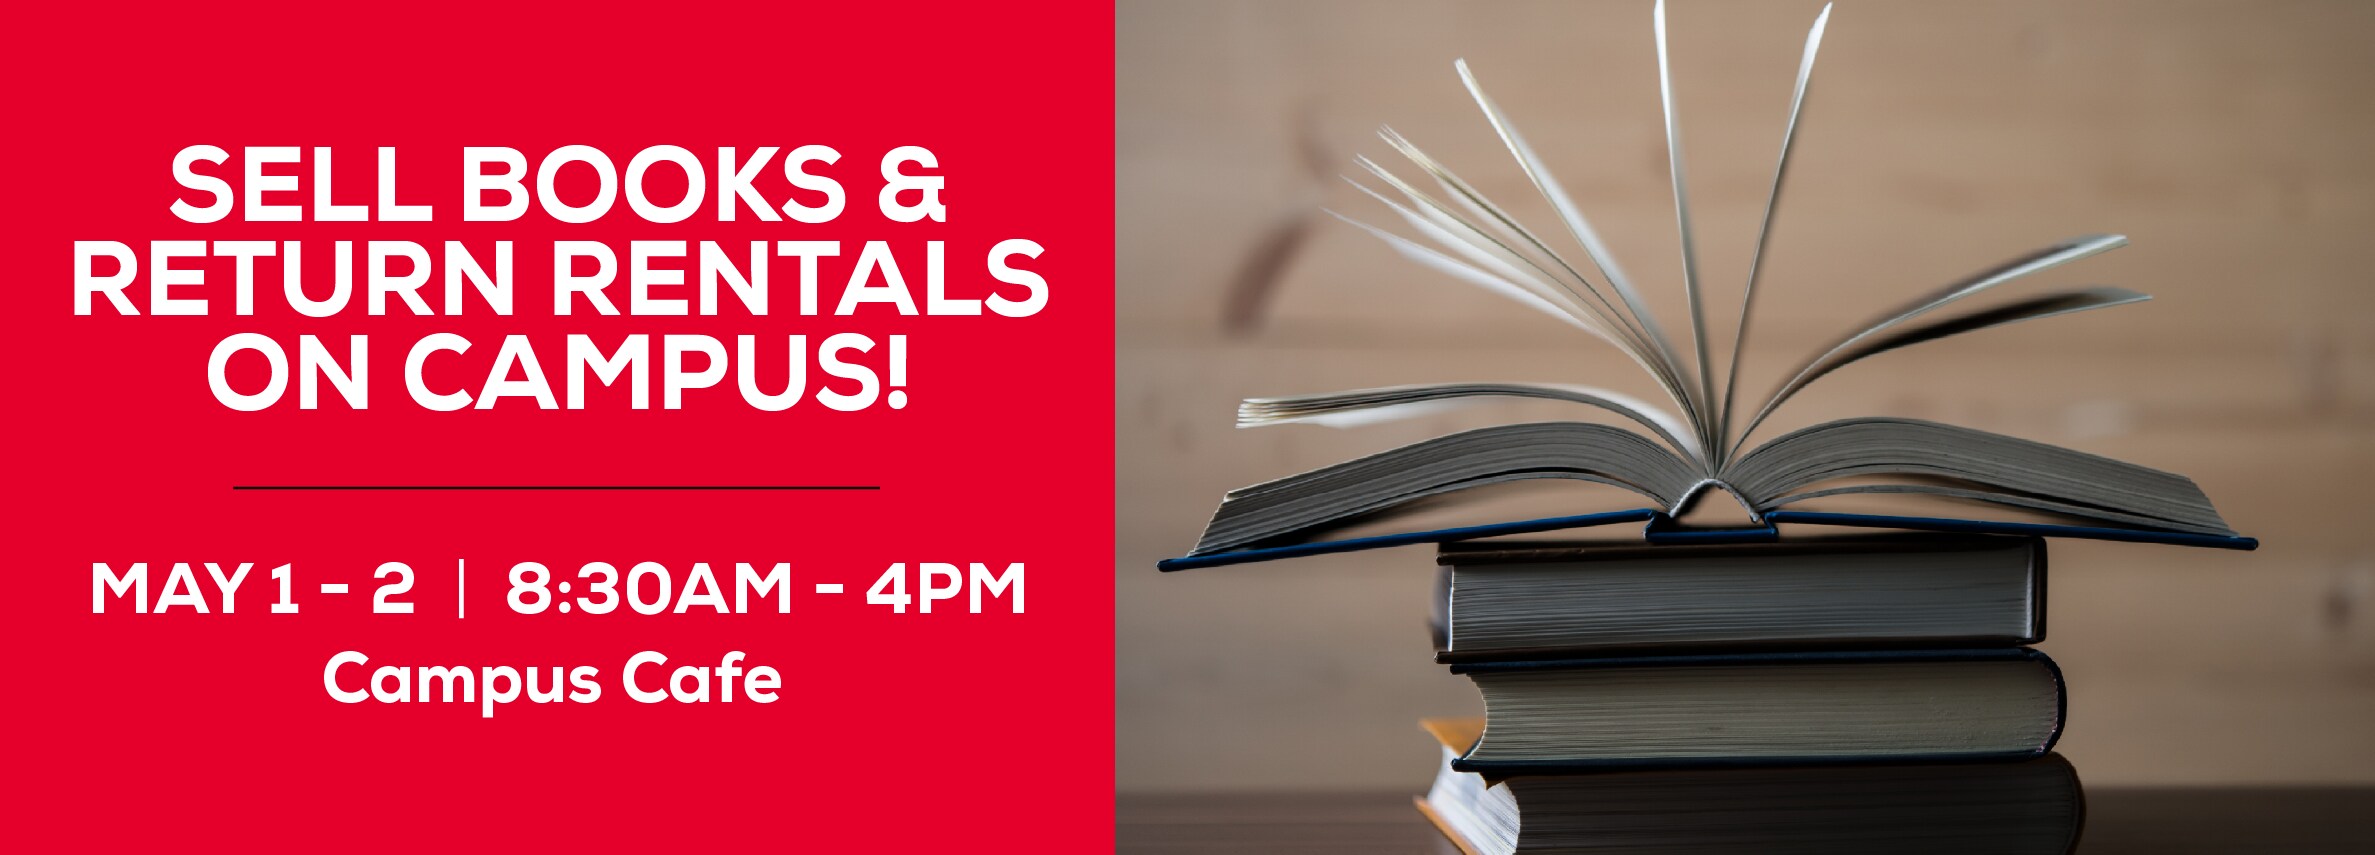 Sell Books & Return Rentals On Campus! May 1 - 2 | 8:30am - 4pm. Campus Cafe